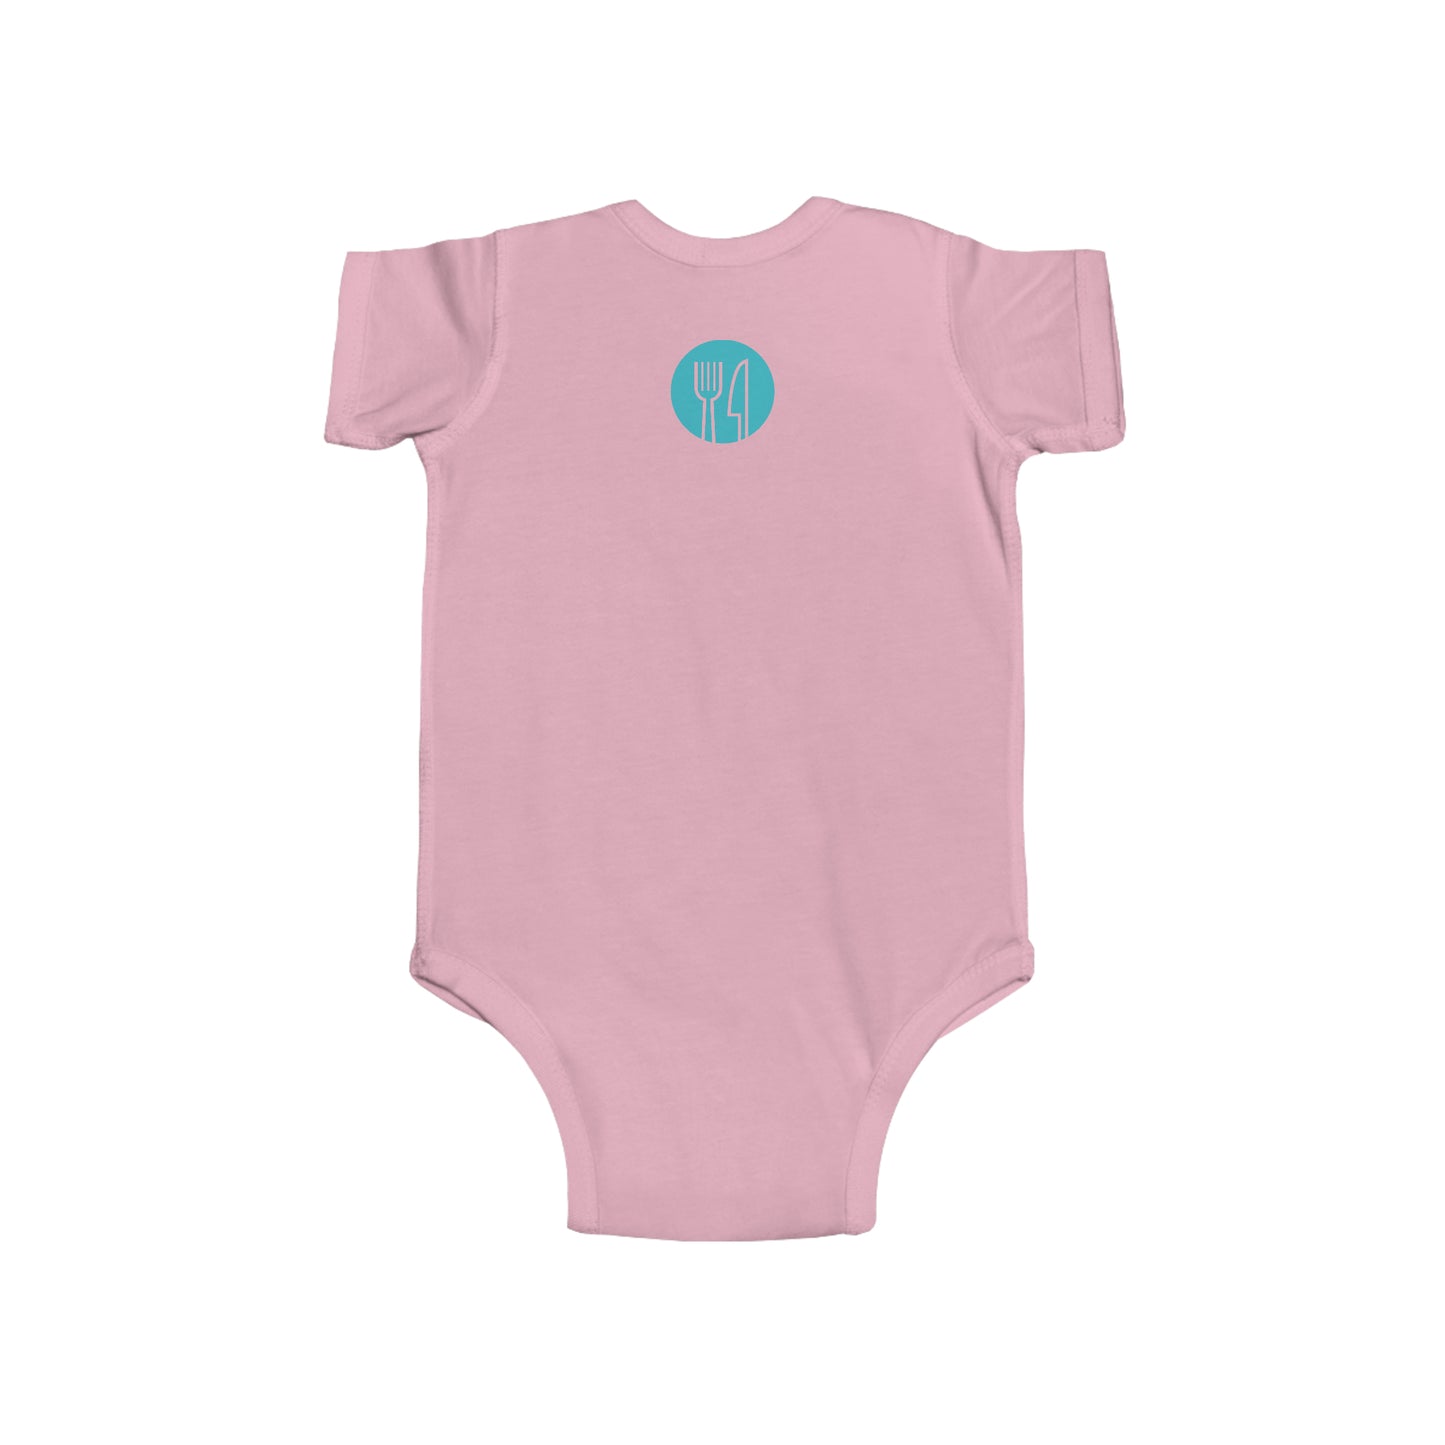 Infant Fine Jersey Bodysuit - Don't eat the straight ones